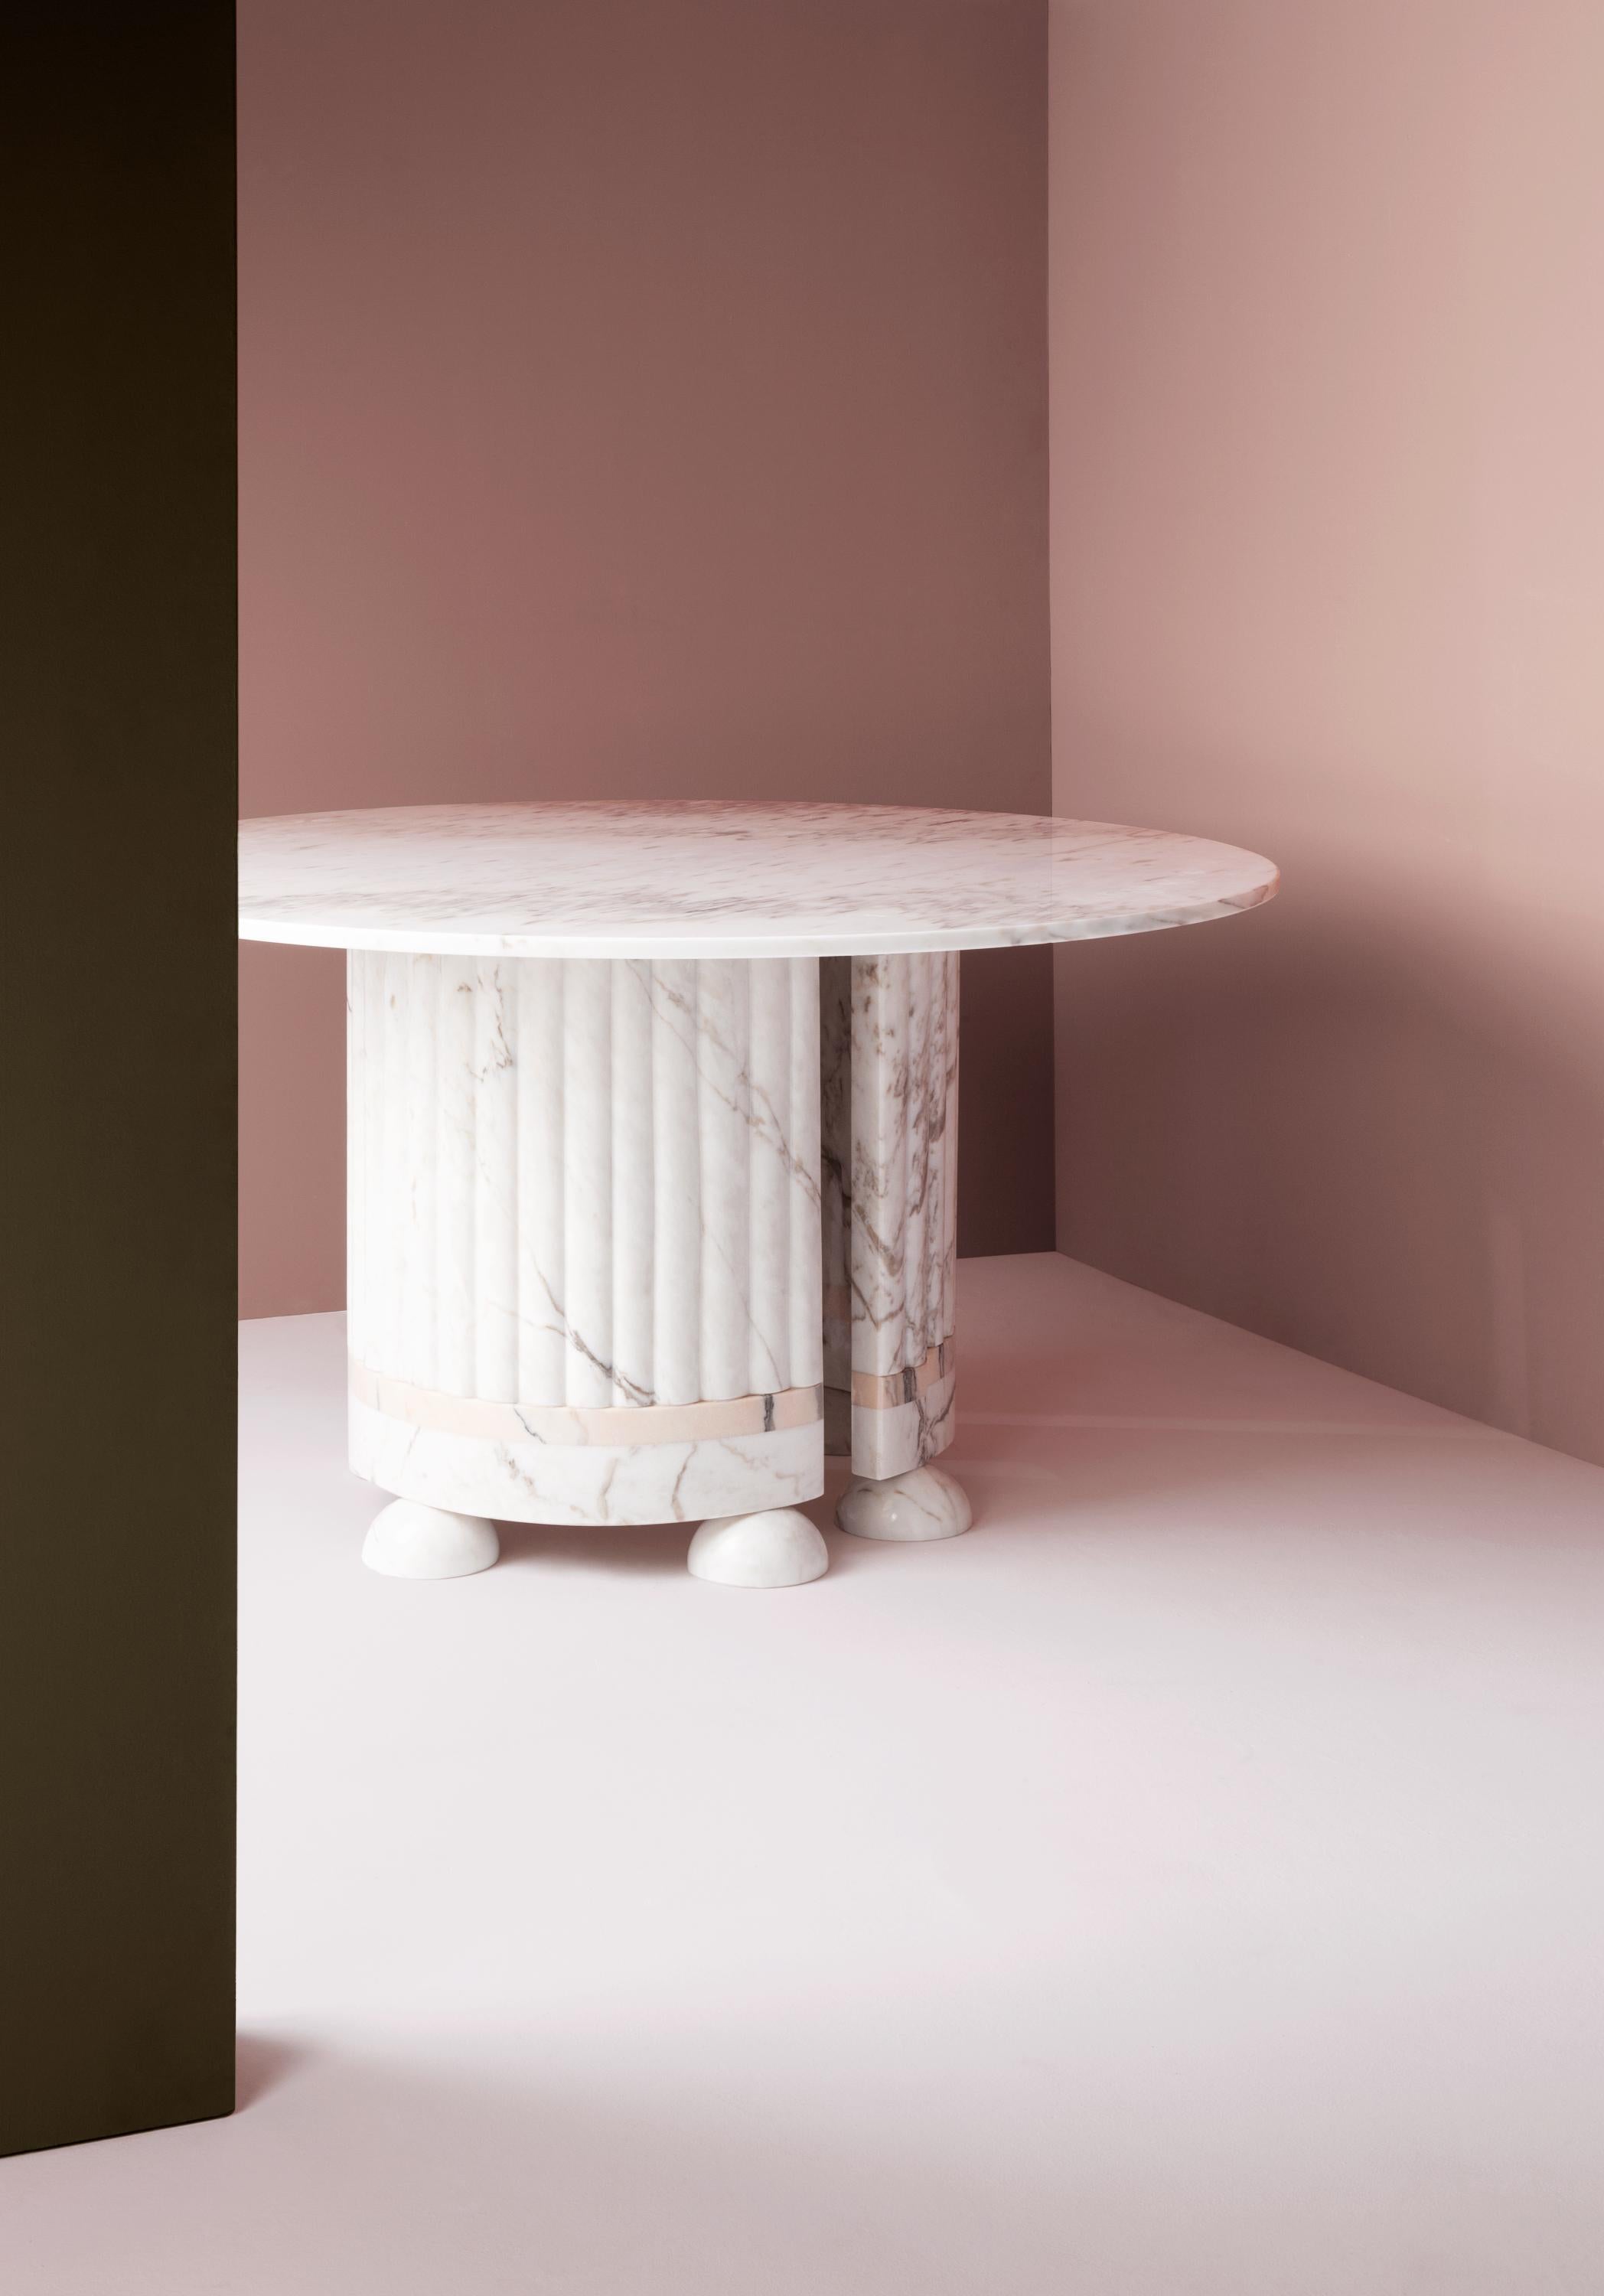 Memphis Dinner Table by Dooq
Ø 130 cm 51”
H 77 cm 30”

Materials: estremoz rose and white Marble

Dooq is a design company dedicated to celebrate the luxury of living. Creating designs that stimulate the senses, whose conceptual approach is inspired